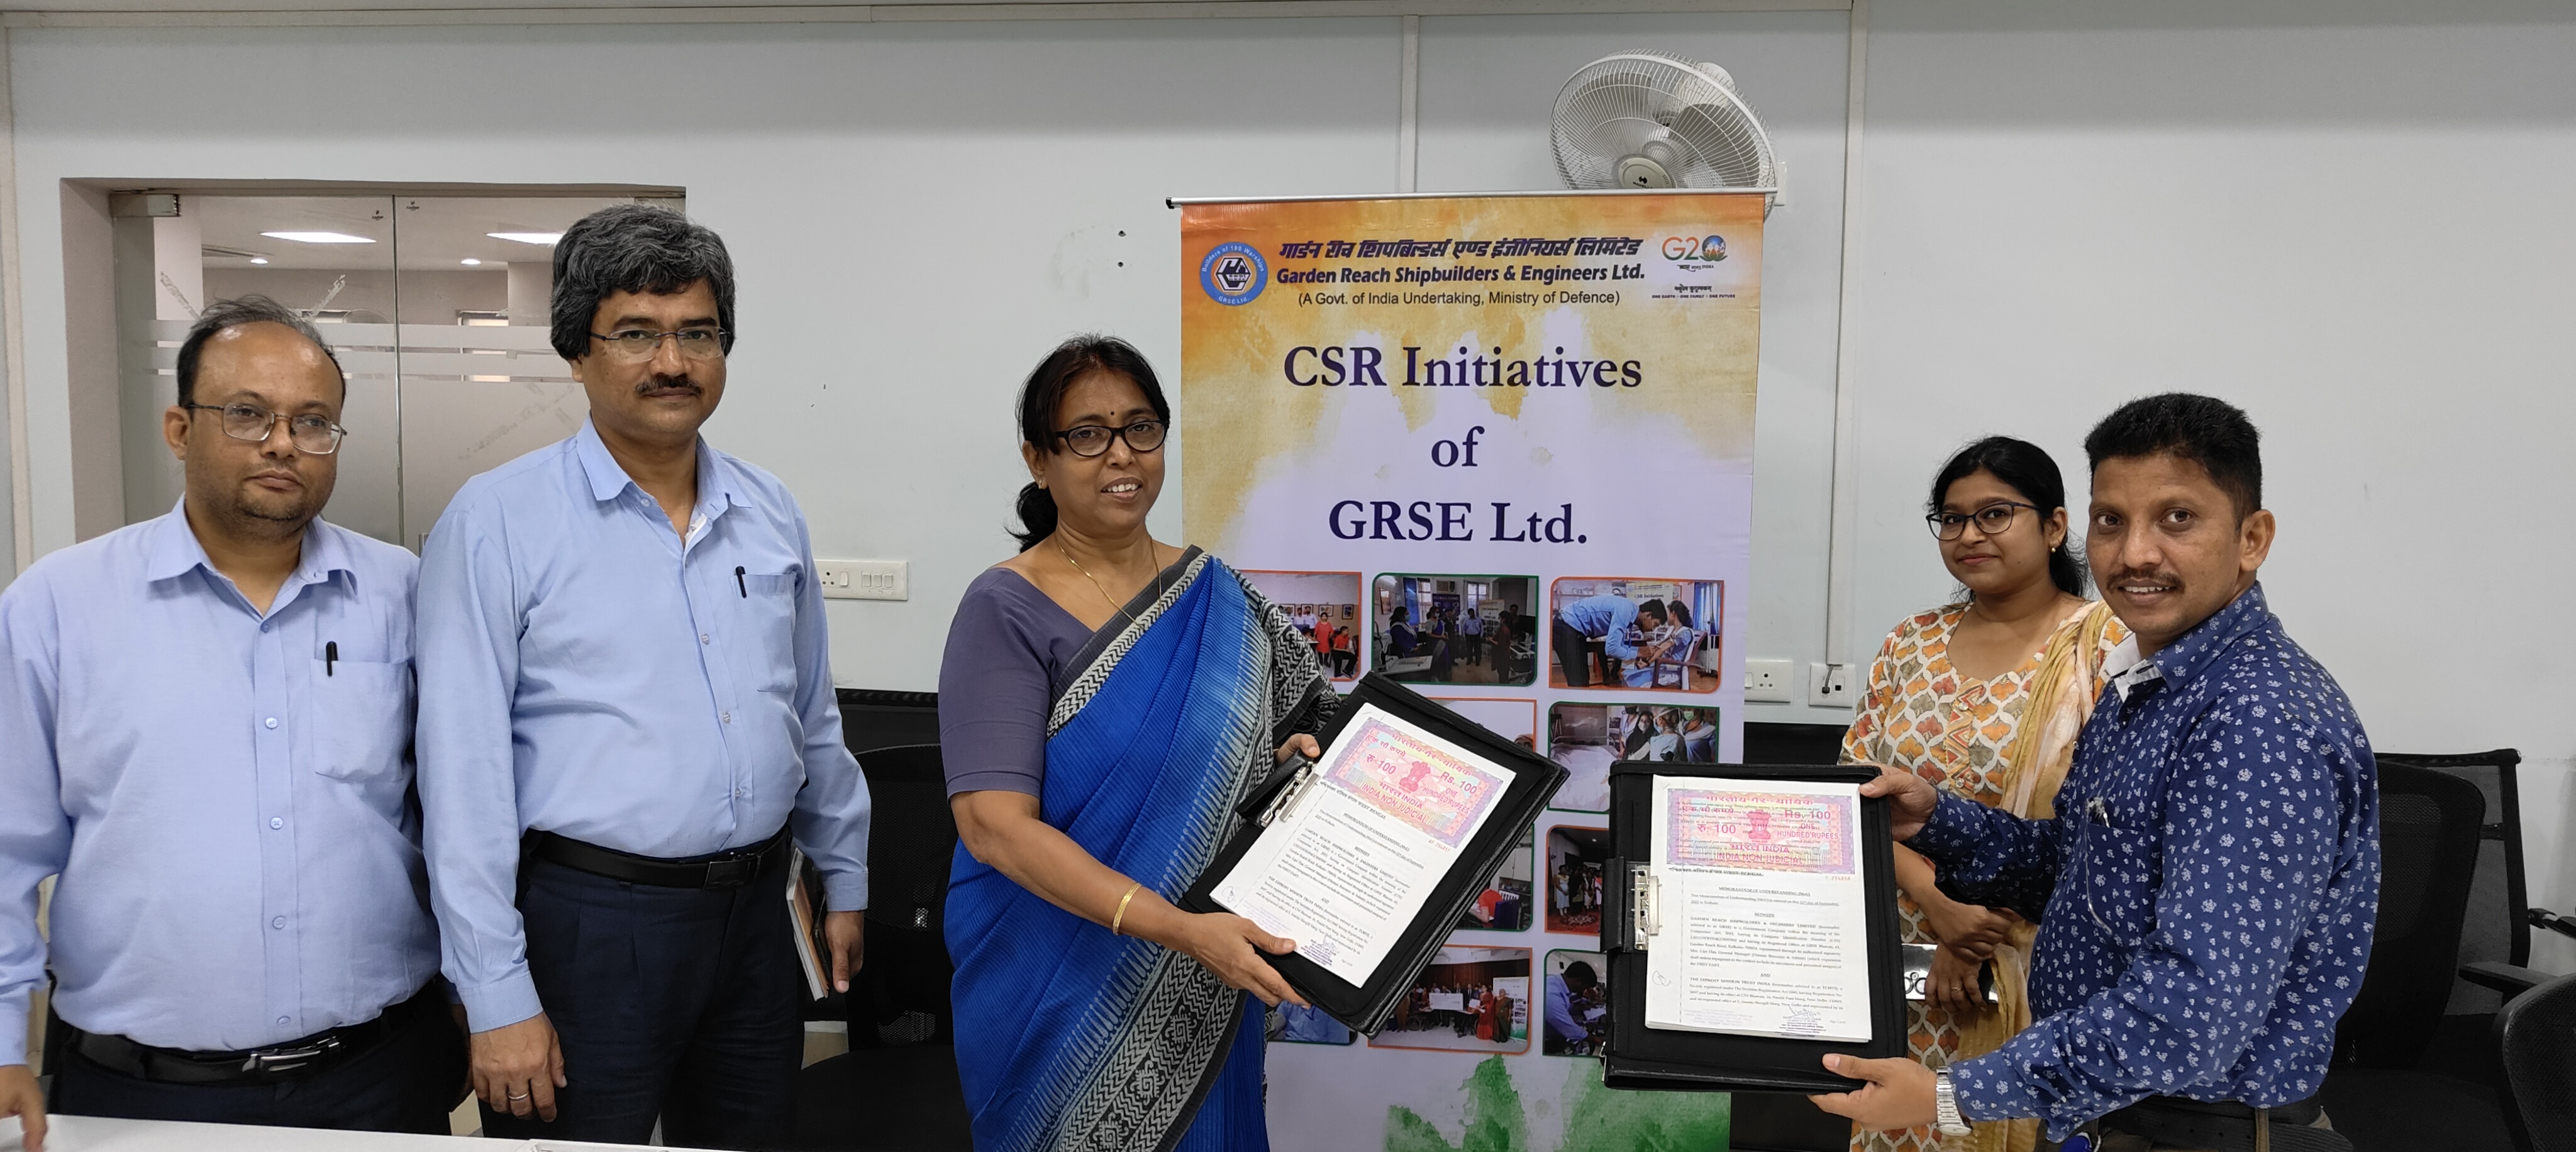 GRSE signed MoU with The Leprosy Mission Trust India for conducting Cataract Surgeries for Leprosy patients on 11 Sep 23